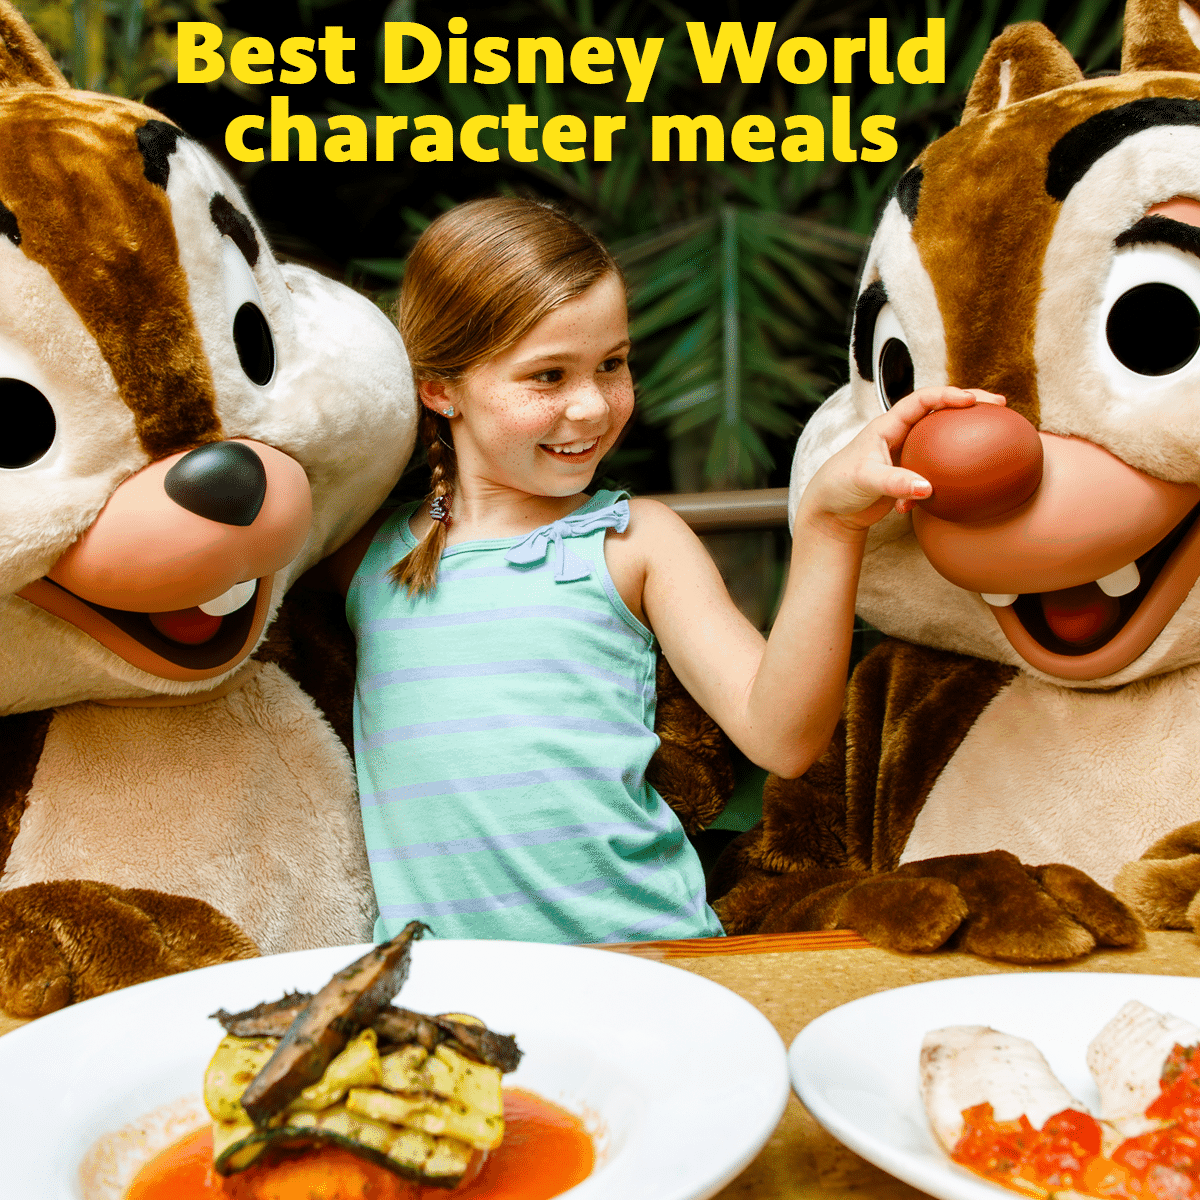 The best Disney World character meals – PREP123